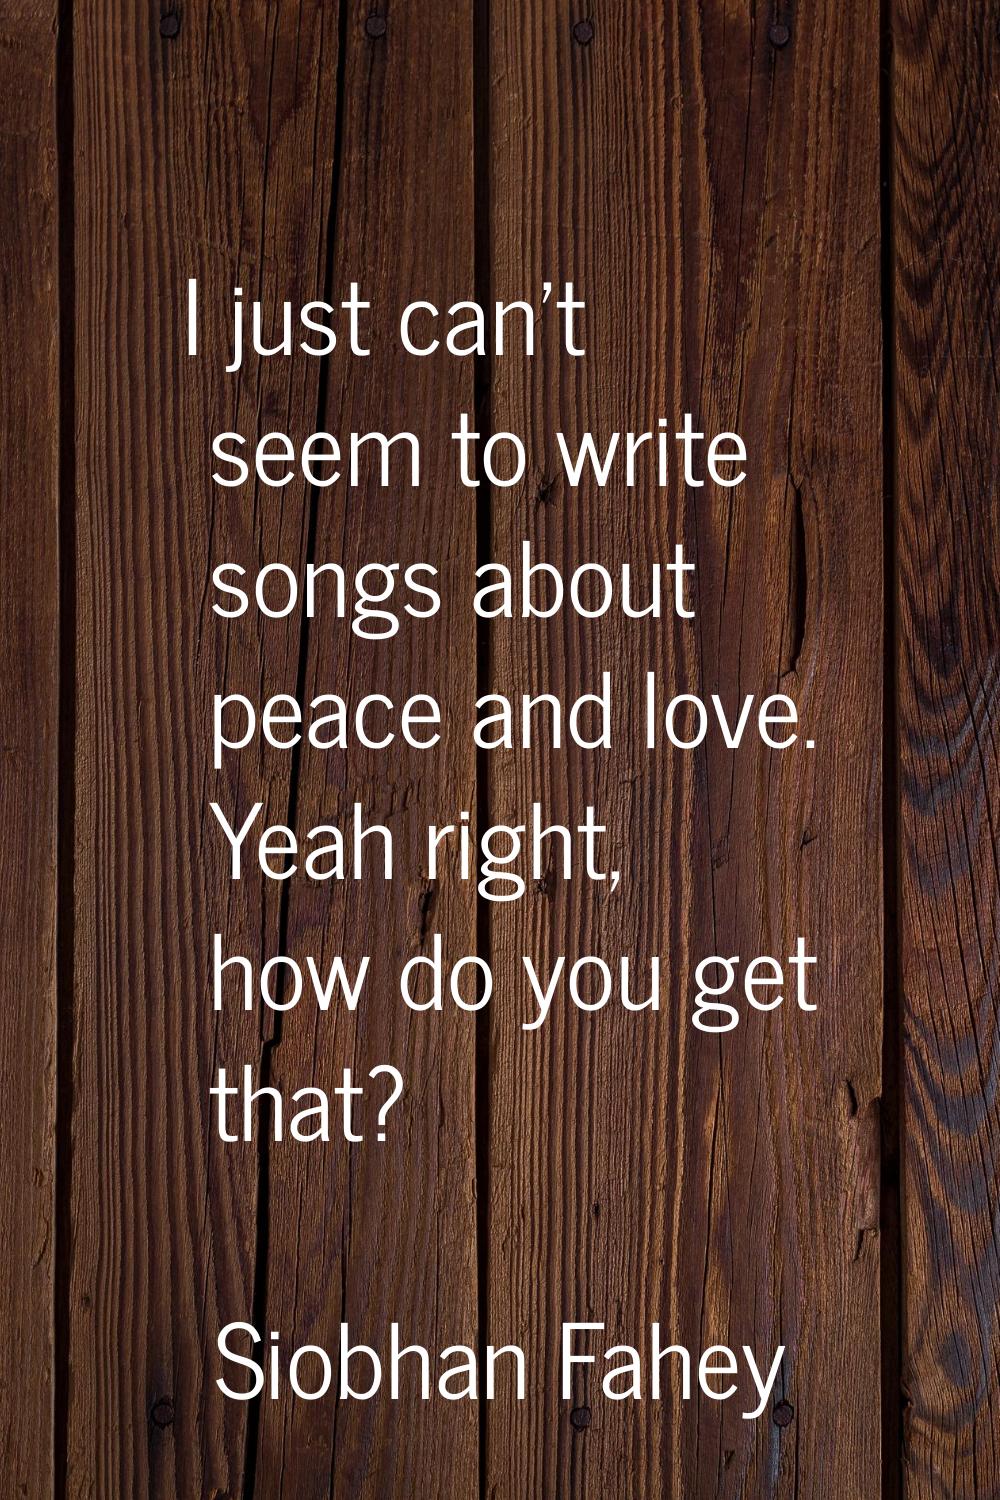 I just can't seem to write songs about peace and love. Yeah right, how do you get that?